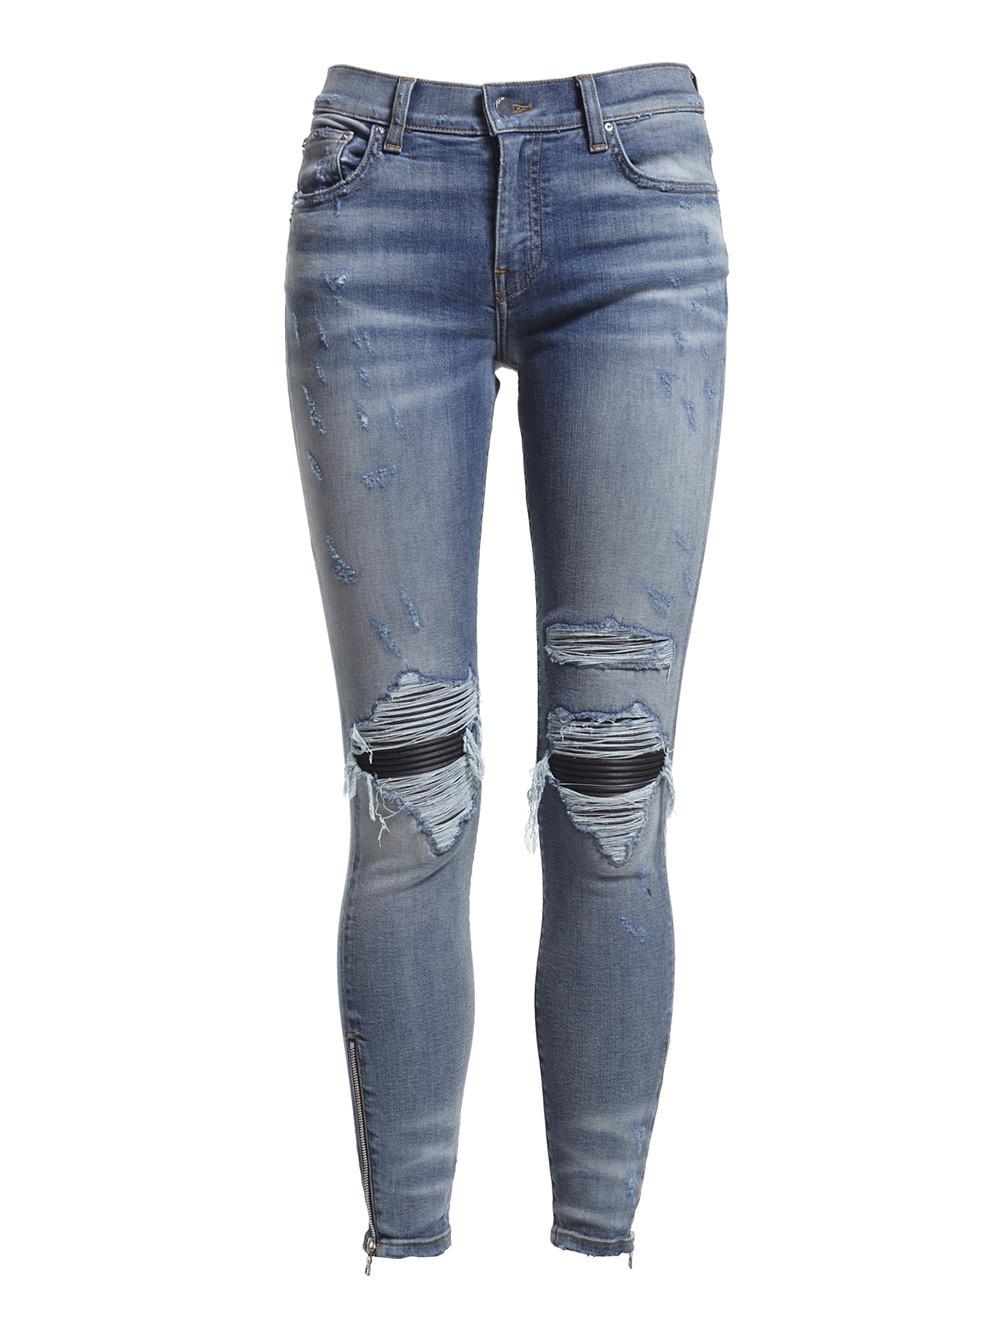 Amiri Mx1 Classic Leather Patch Jeans in Blue - Lyst